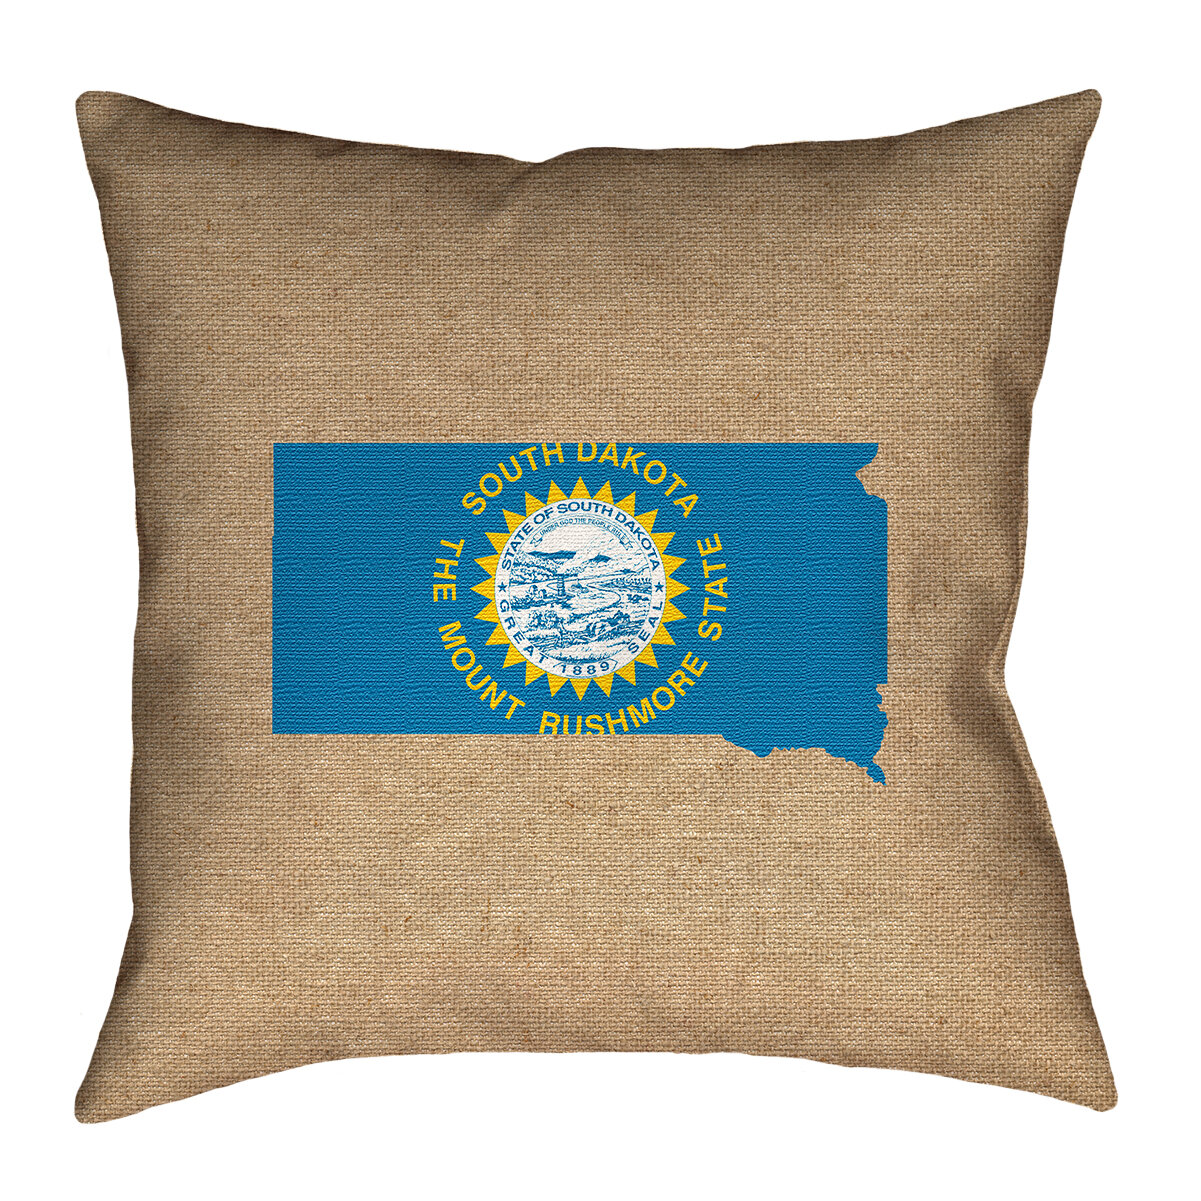 ArtVerse Katelyn Smith 36 x 36 Floor Double Sided Print with Concealed Zipper & Insert Idaho Pillow